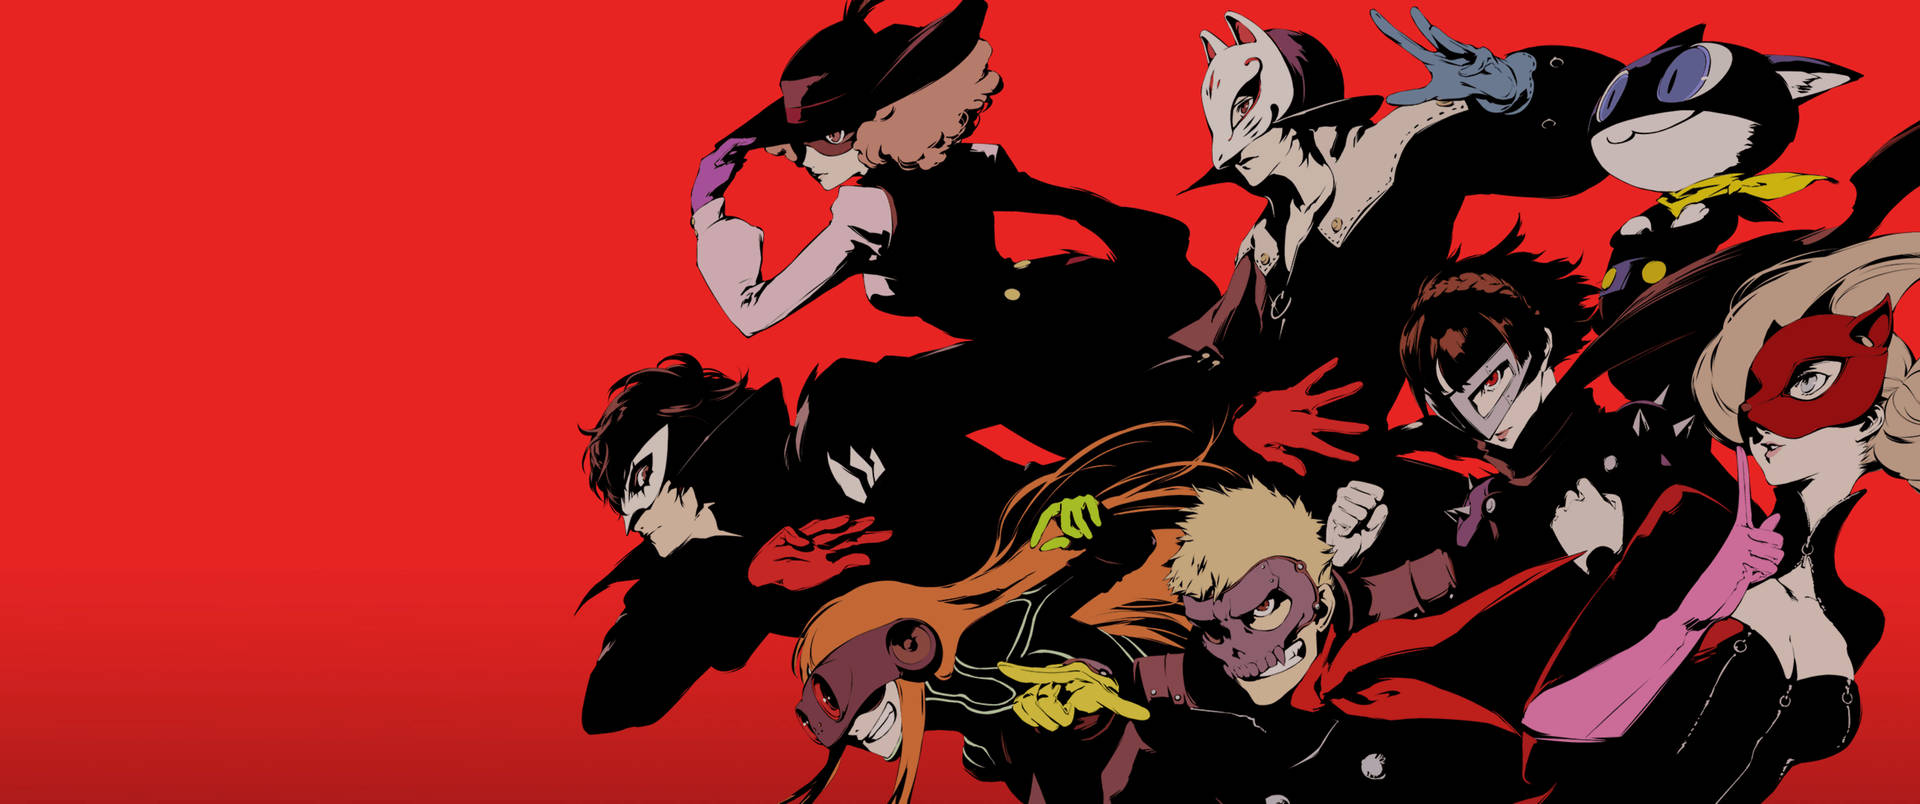 Persona 5 3440X1440 Wallpaper and Background Image